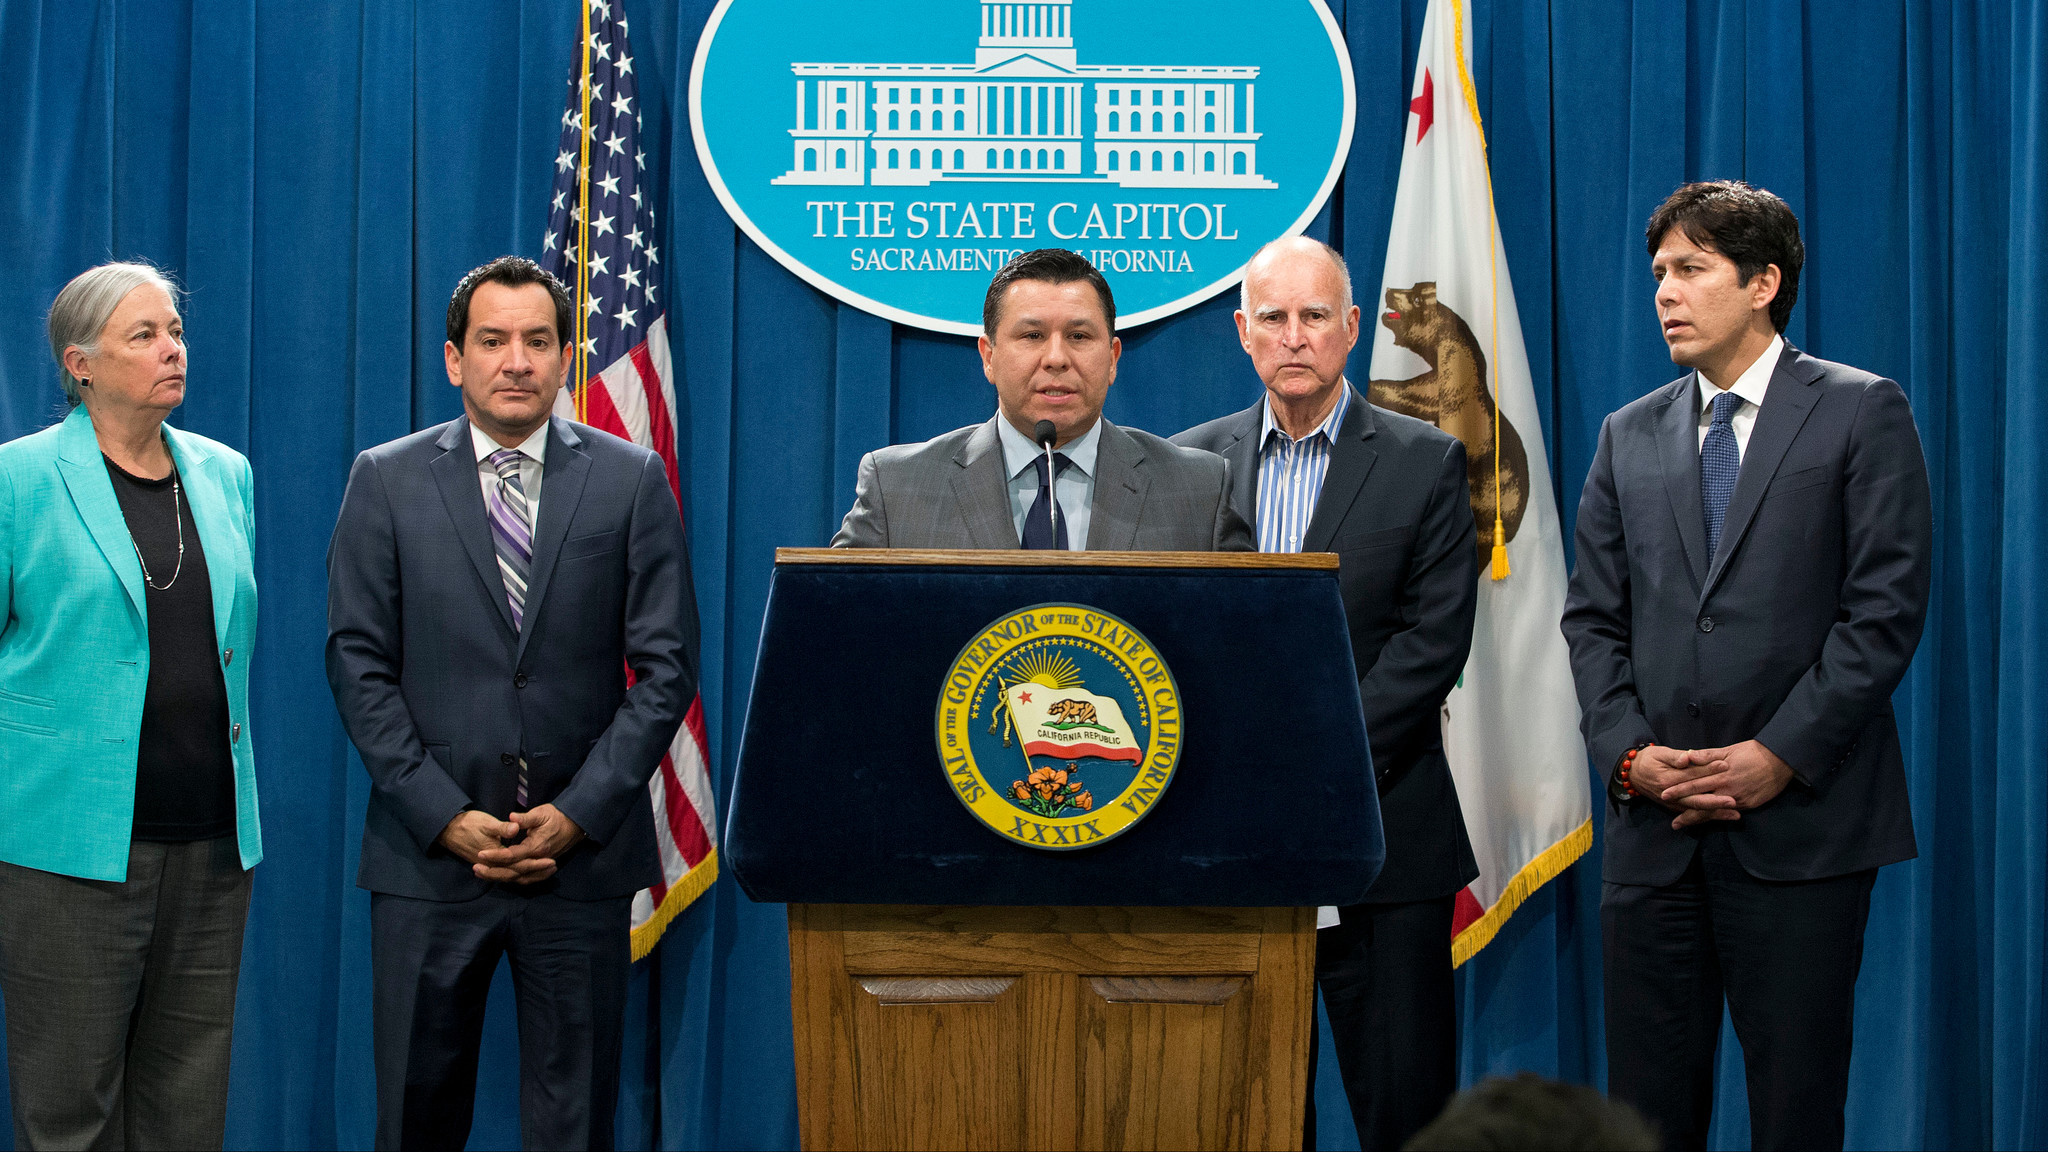 Garcia speaks at a news conference with other leaders after the climate legislation was passed.